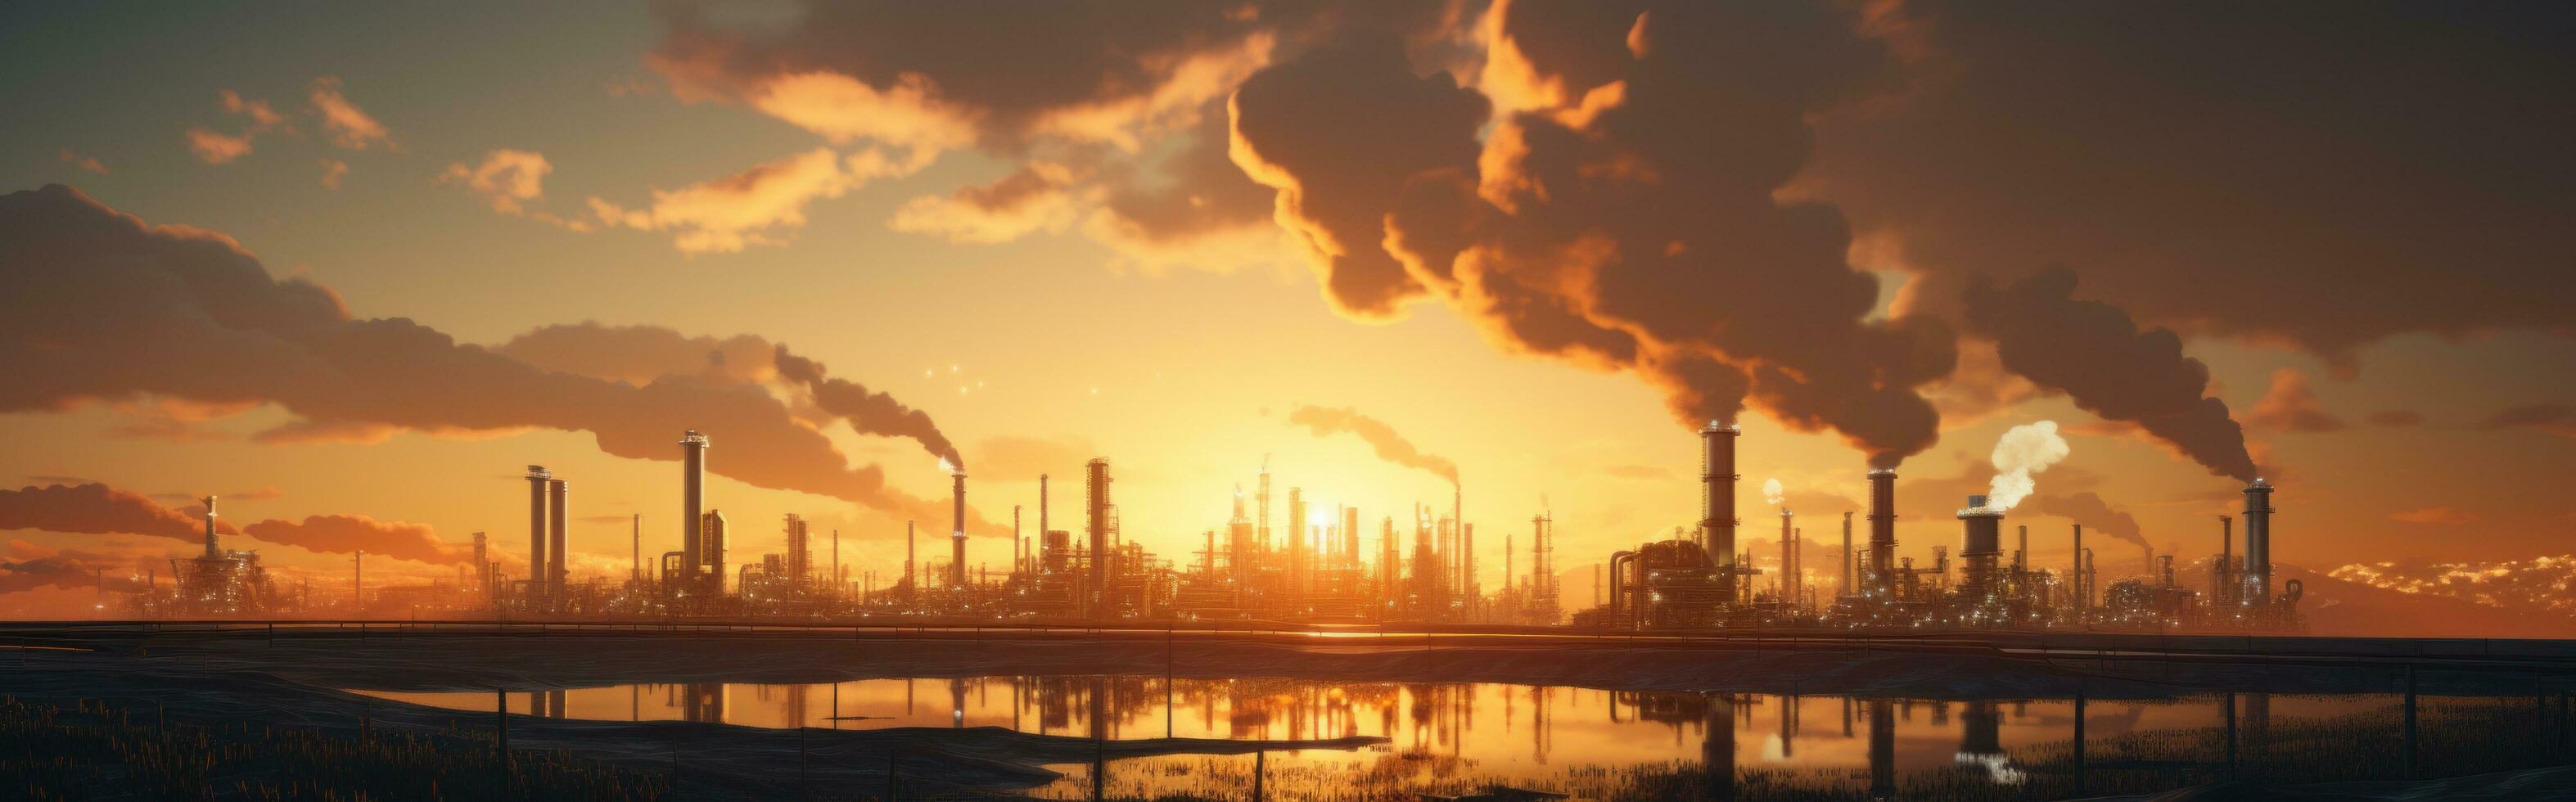 a large industrial complex and oil pipeline at sunset photo